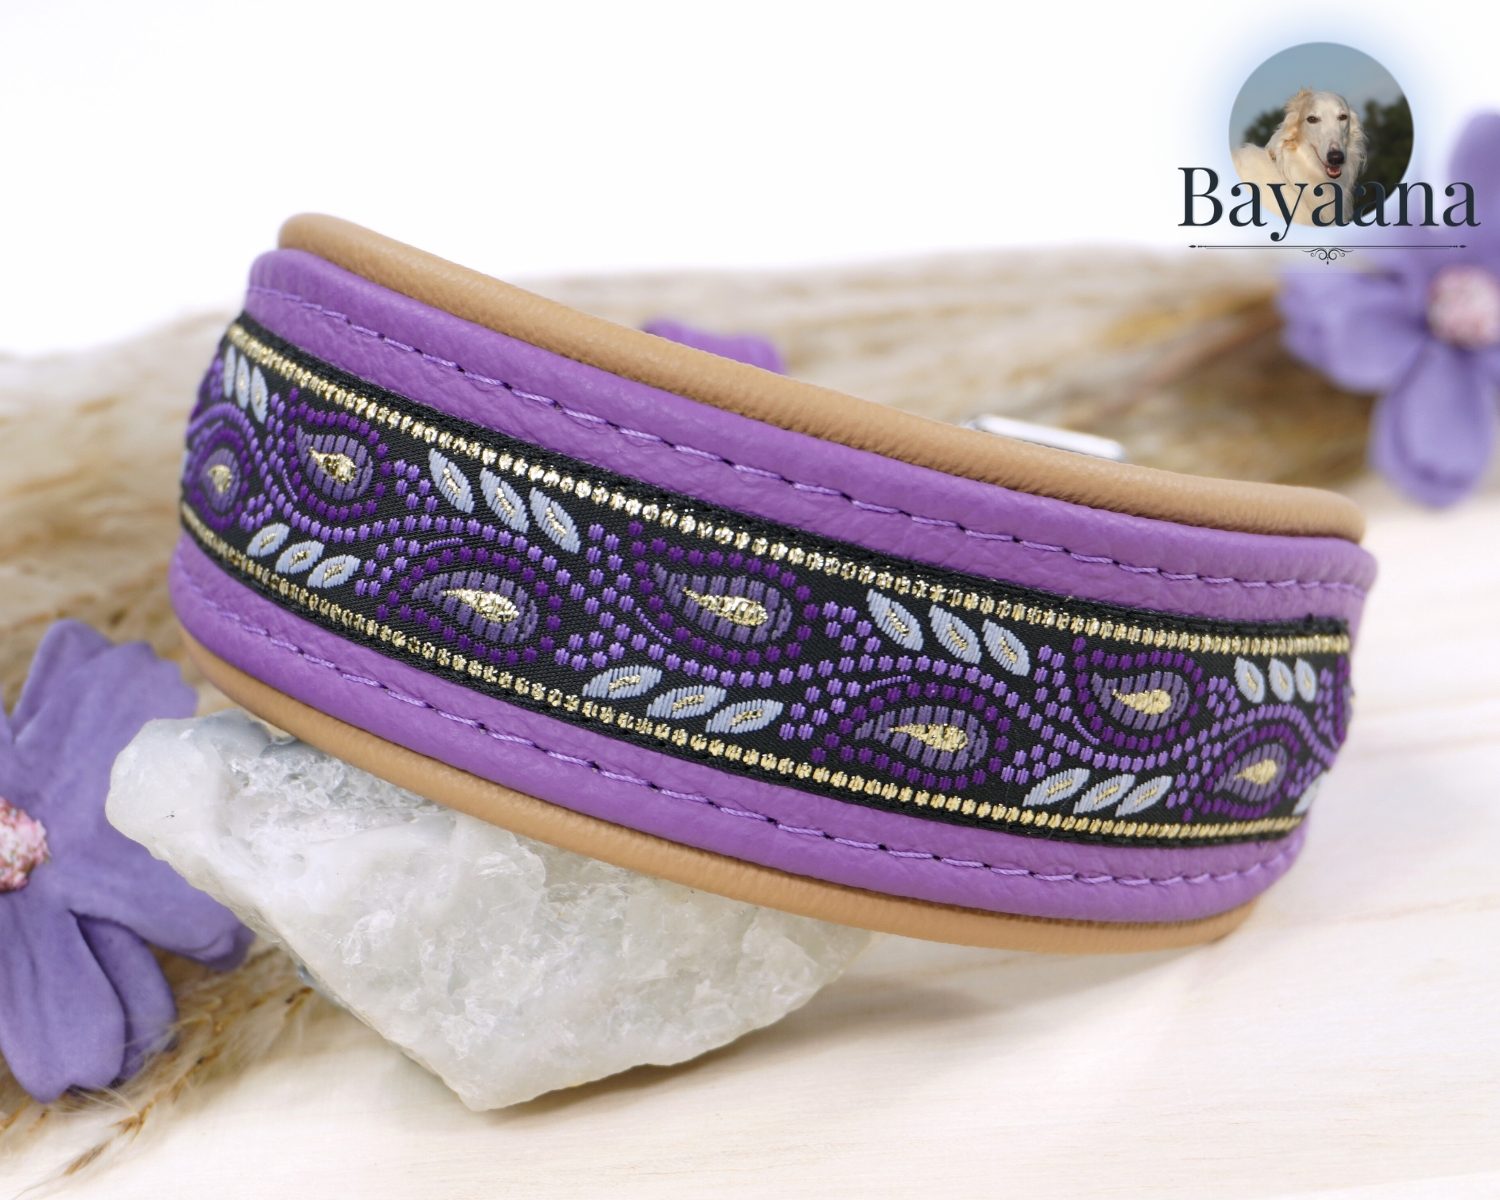 Delicate Sighthound Collar made of leather in purple and light brown